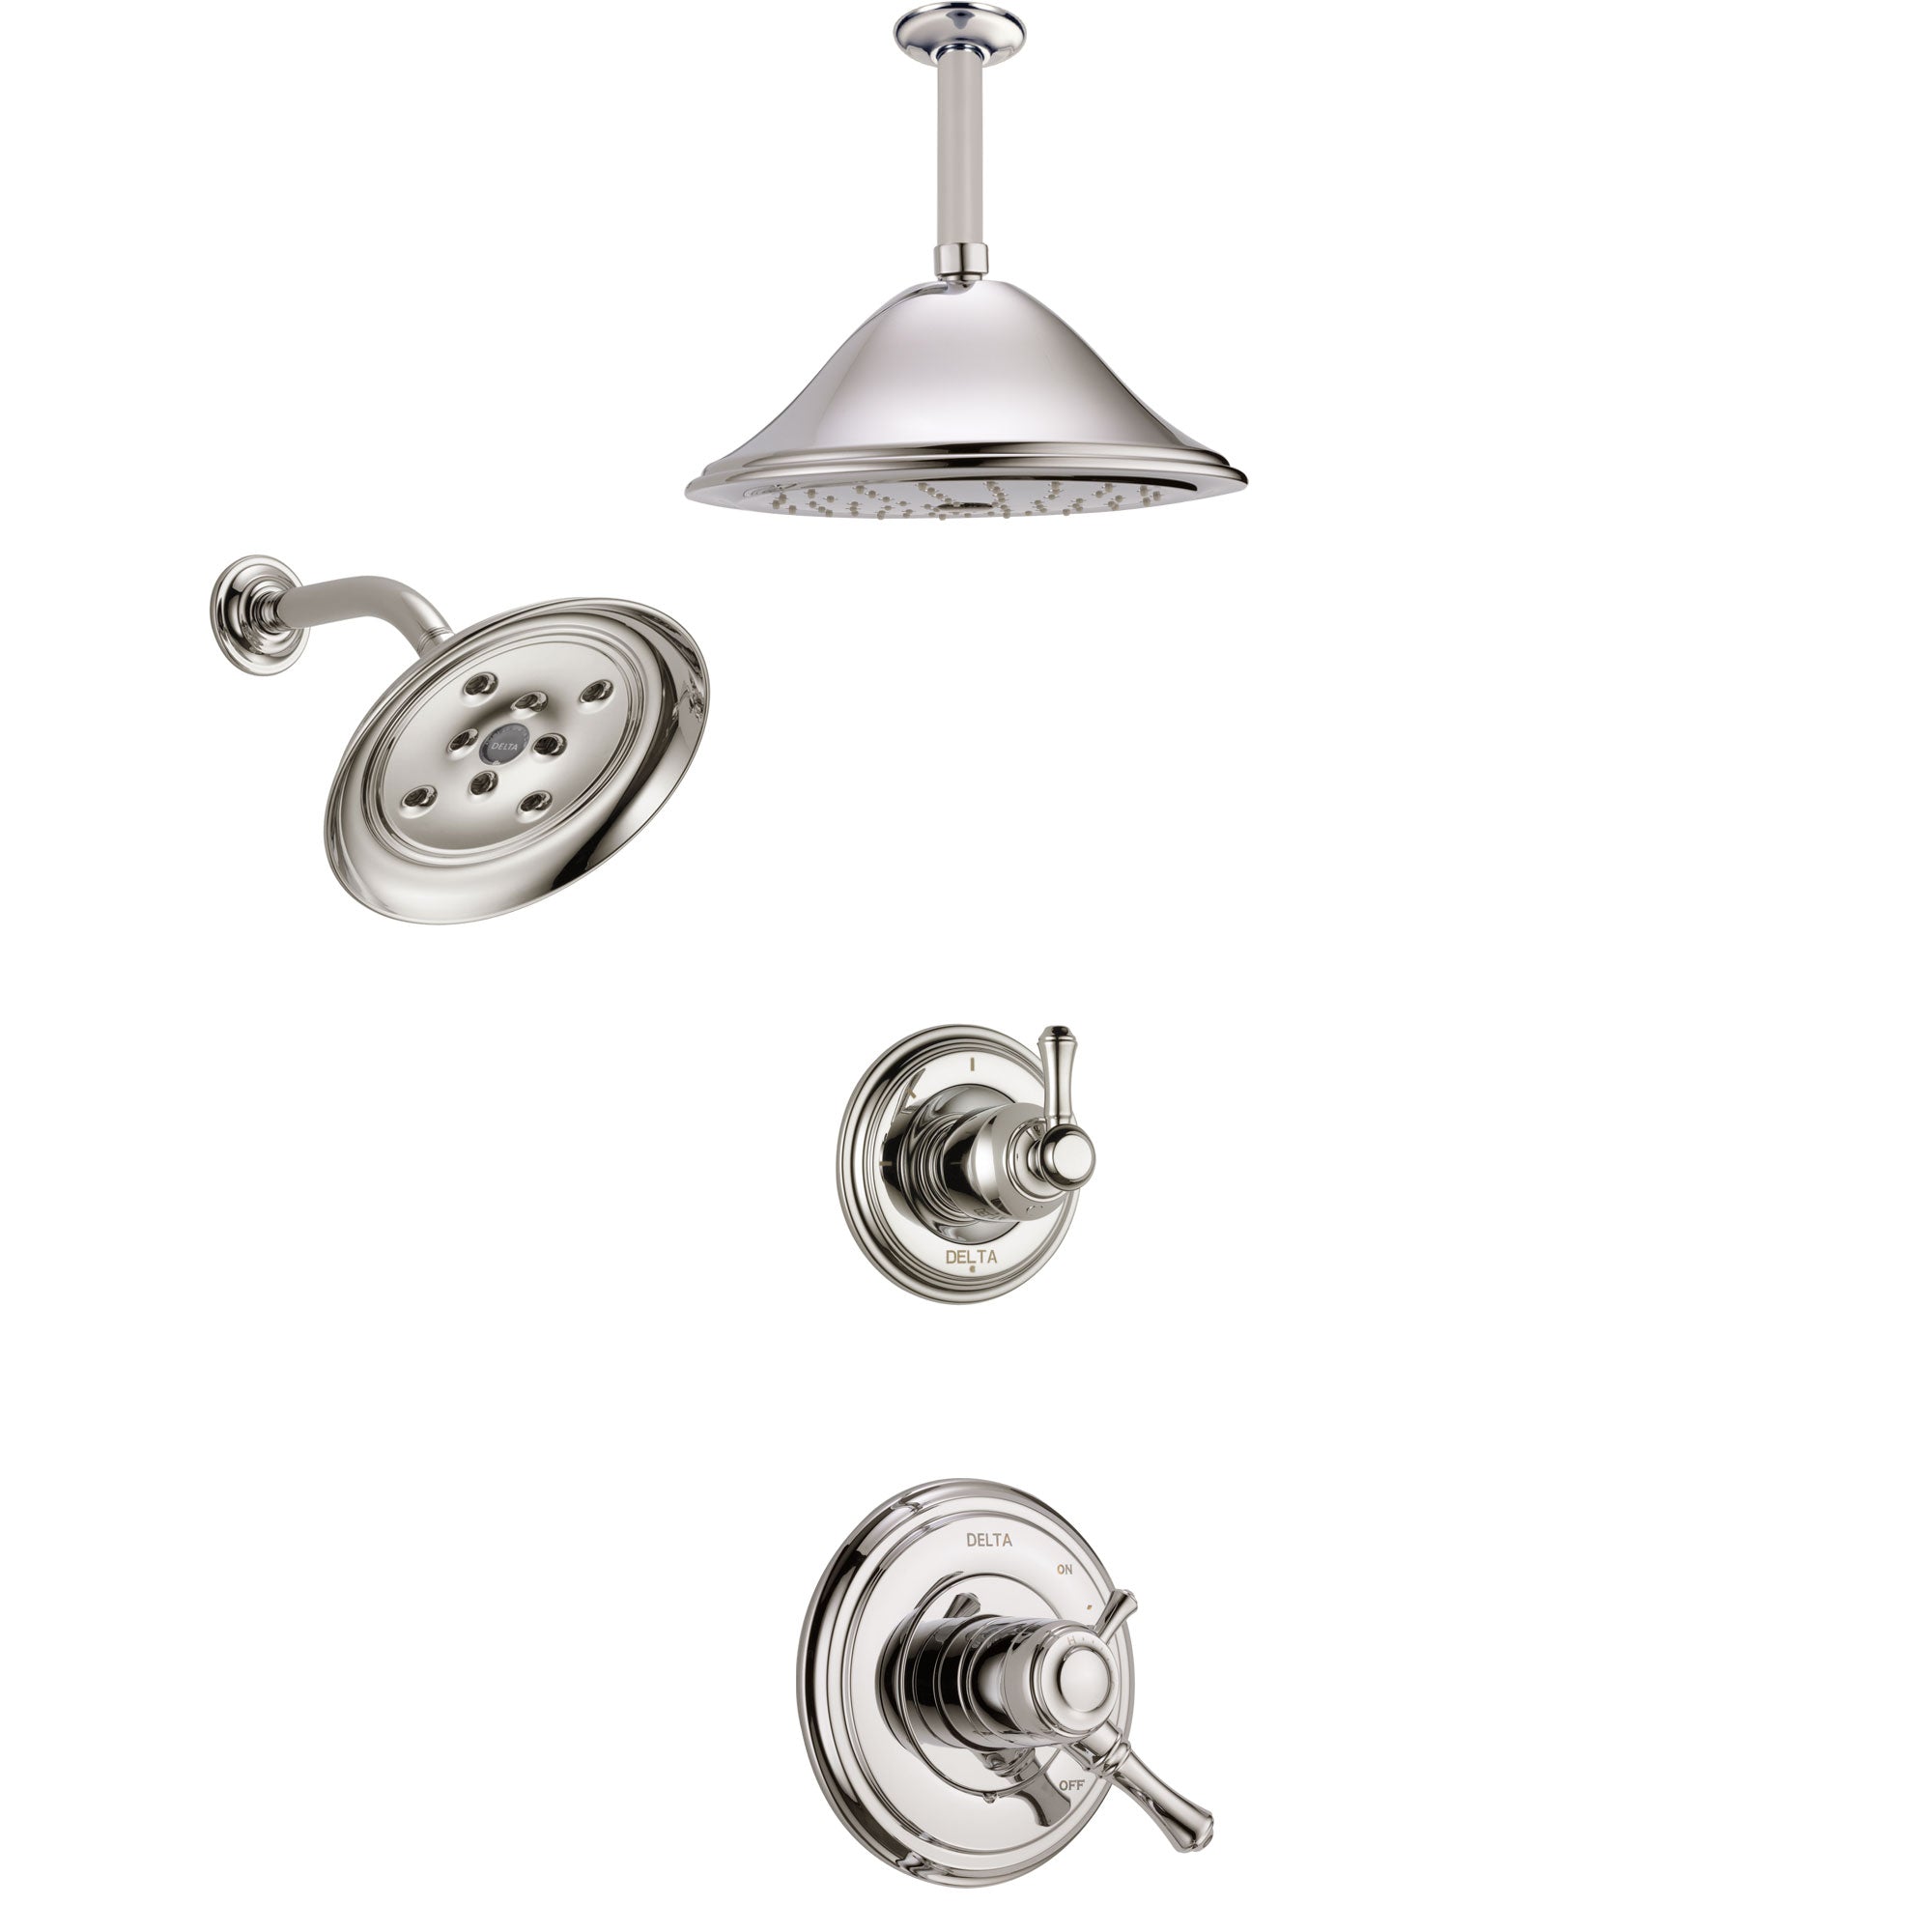 Delta Cassidy Polished Nickel Finish Shower System with Dual Control Handle, 3-Setting Diverter, Showerhead, and Ceiling Mount Showerhead SS17297PN3